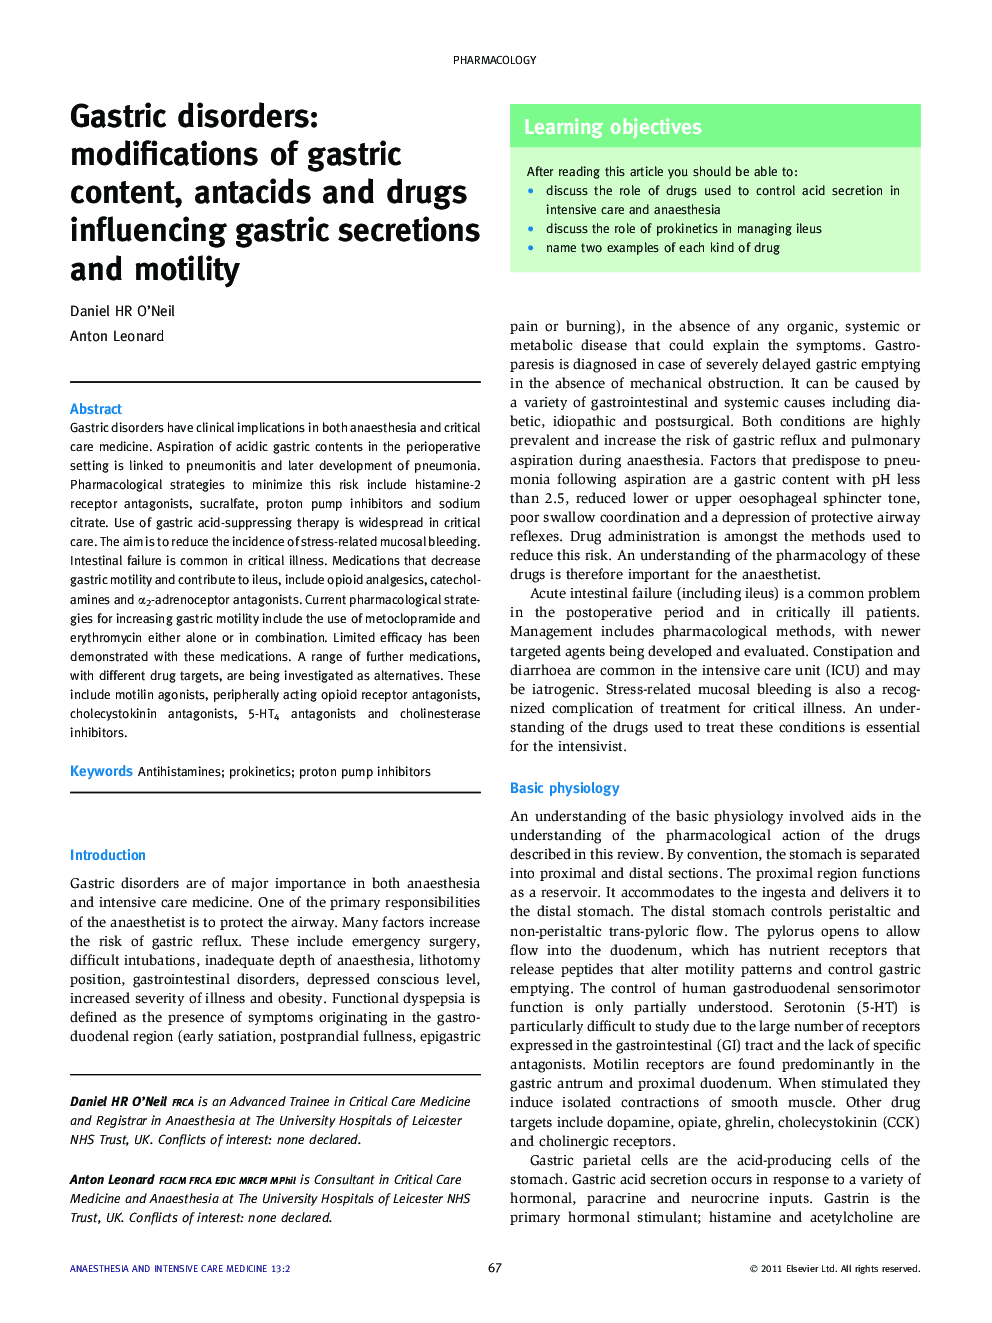 Gastric disorders: modifications of gastric content, antacids and drugs influencing gastric secretions and motility